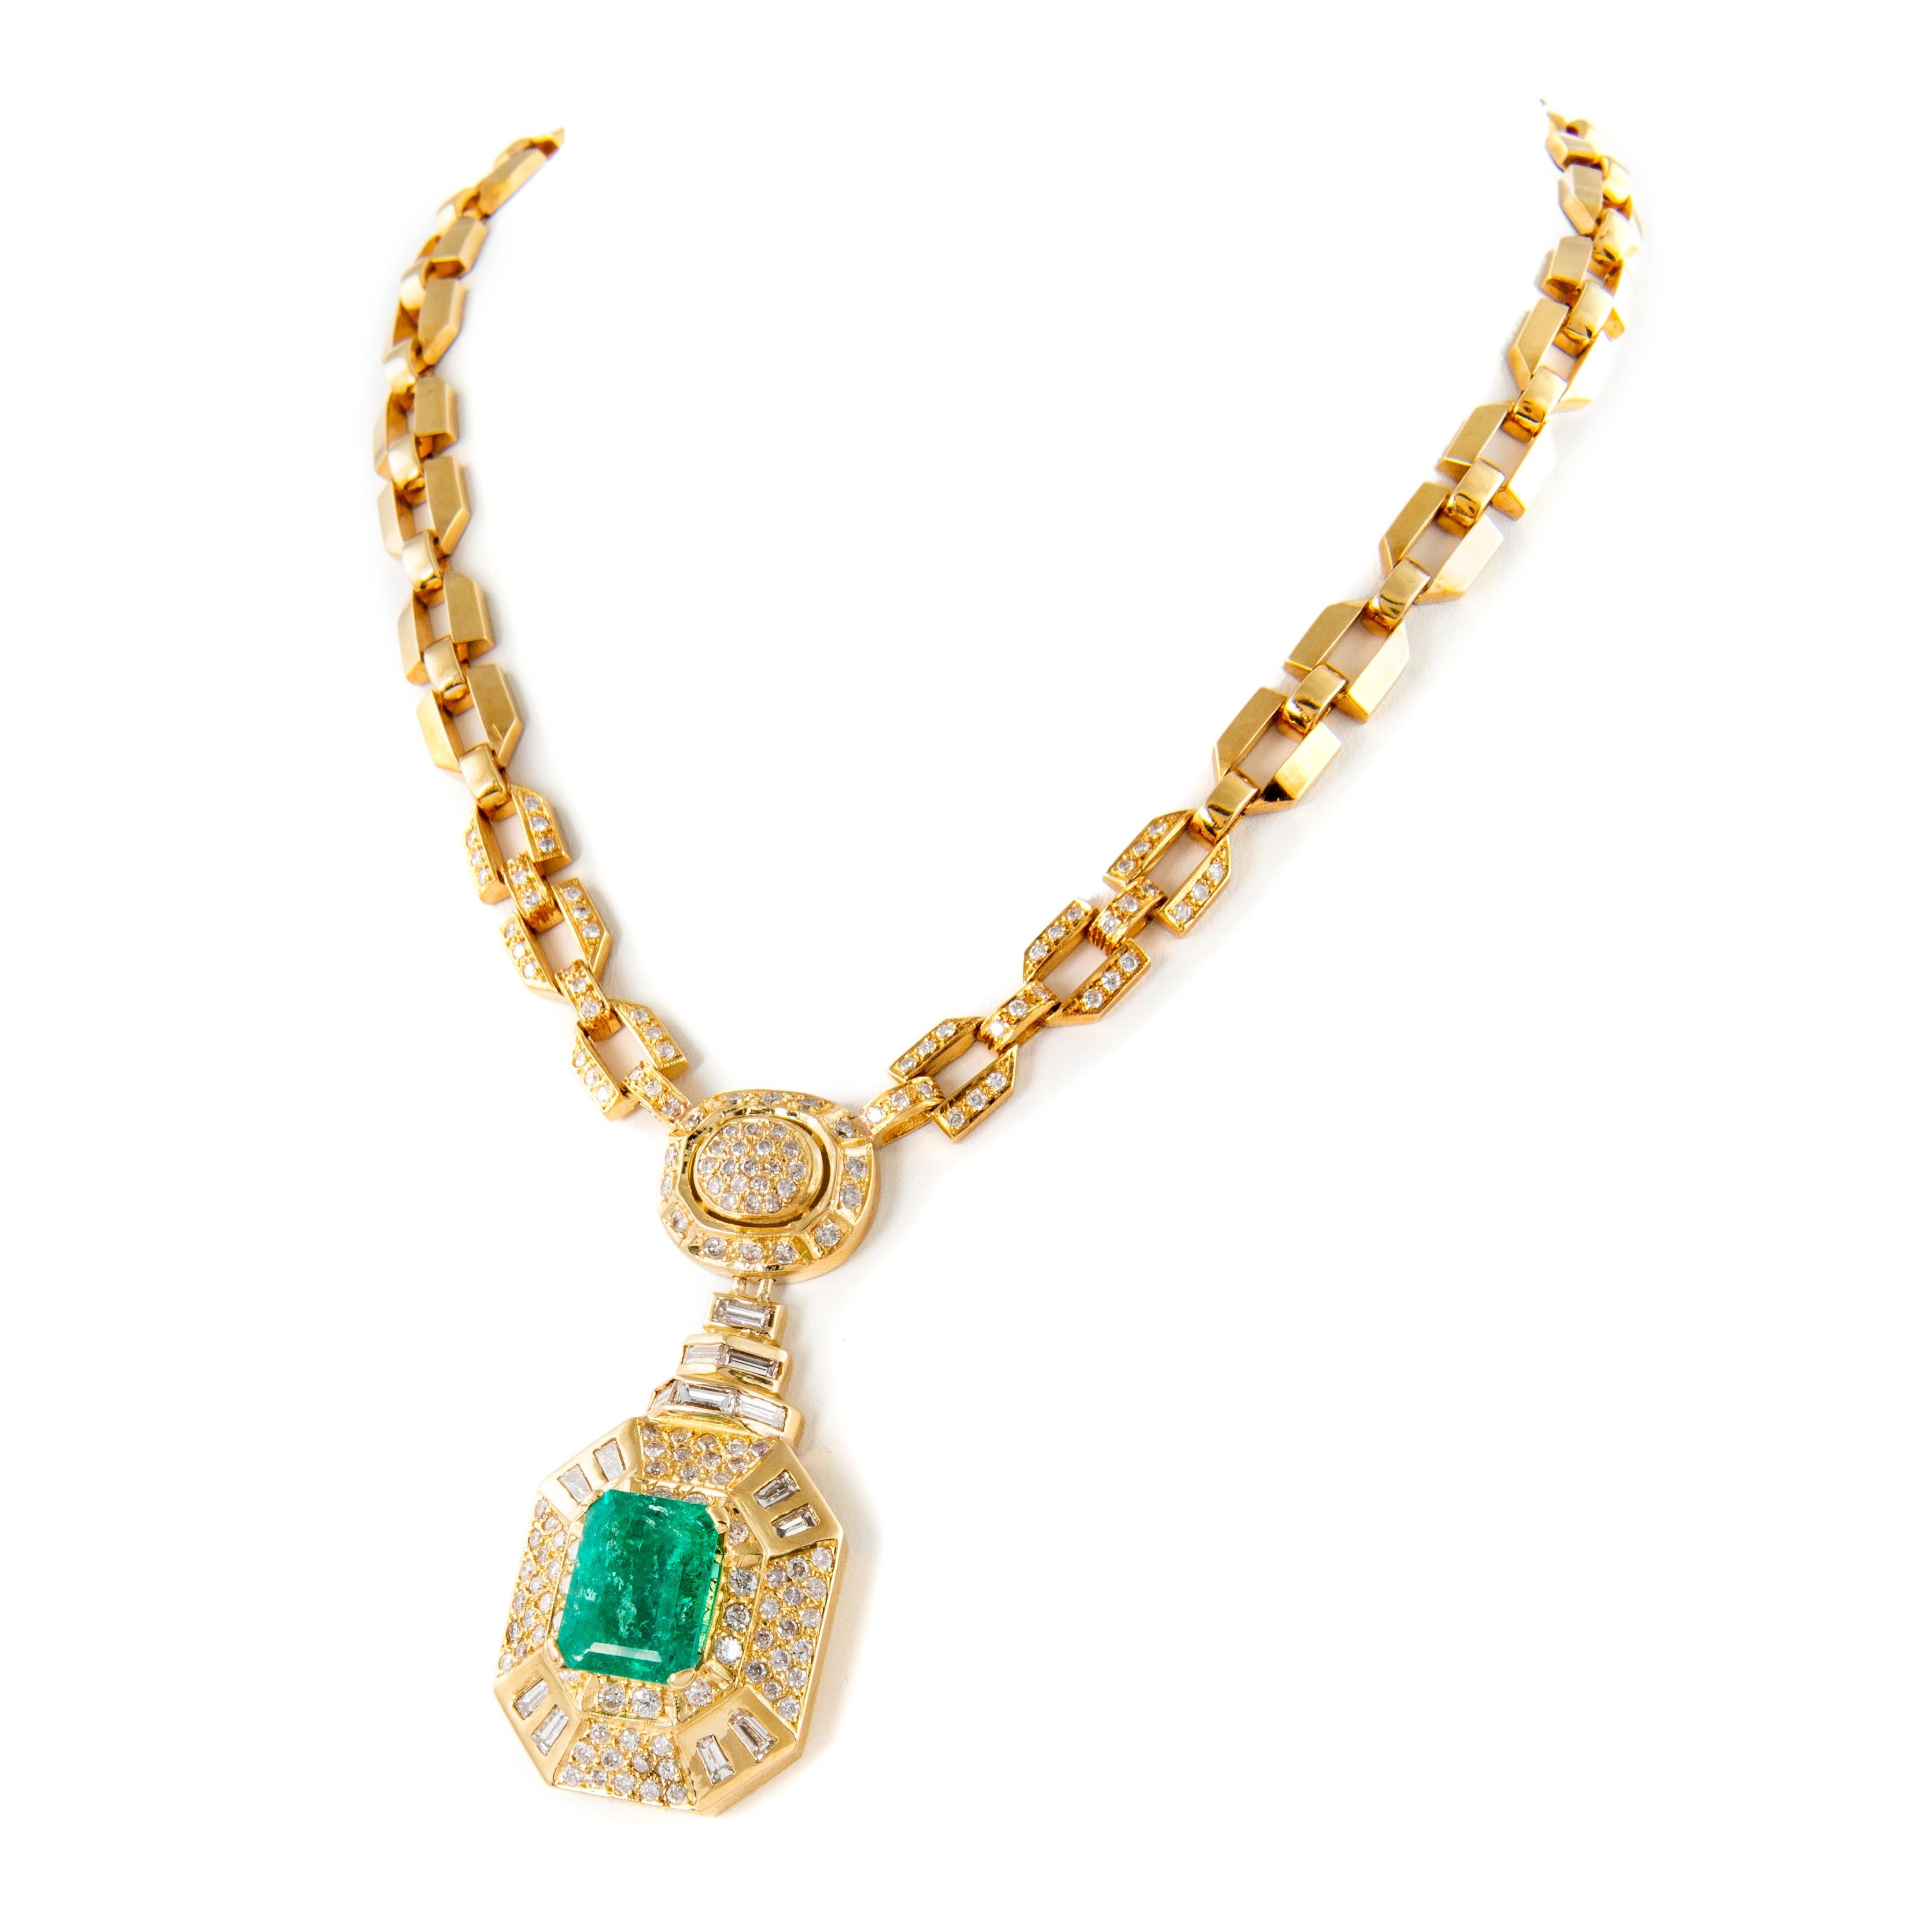 Emerald Cut Art Deco Style 14.41ctt Colombian Emerald with Diamond Necklace 18k Yellow Gold